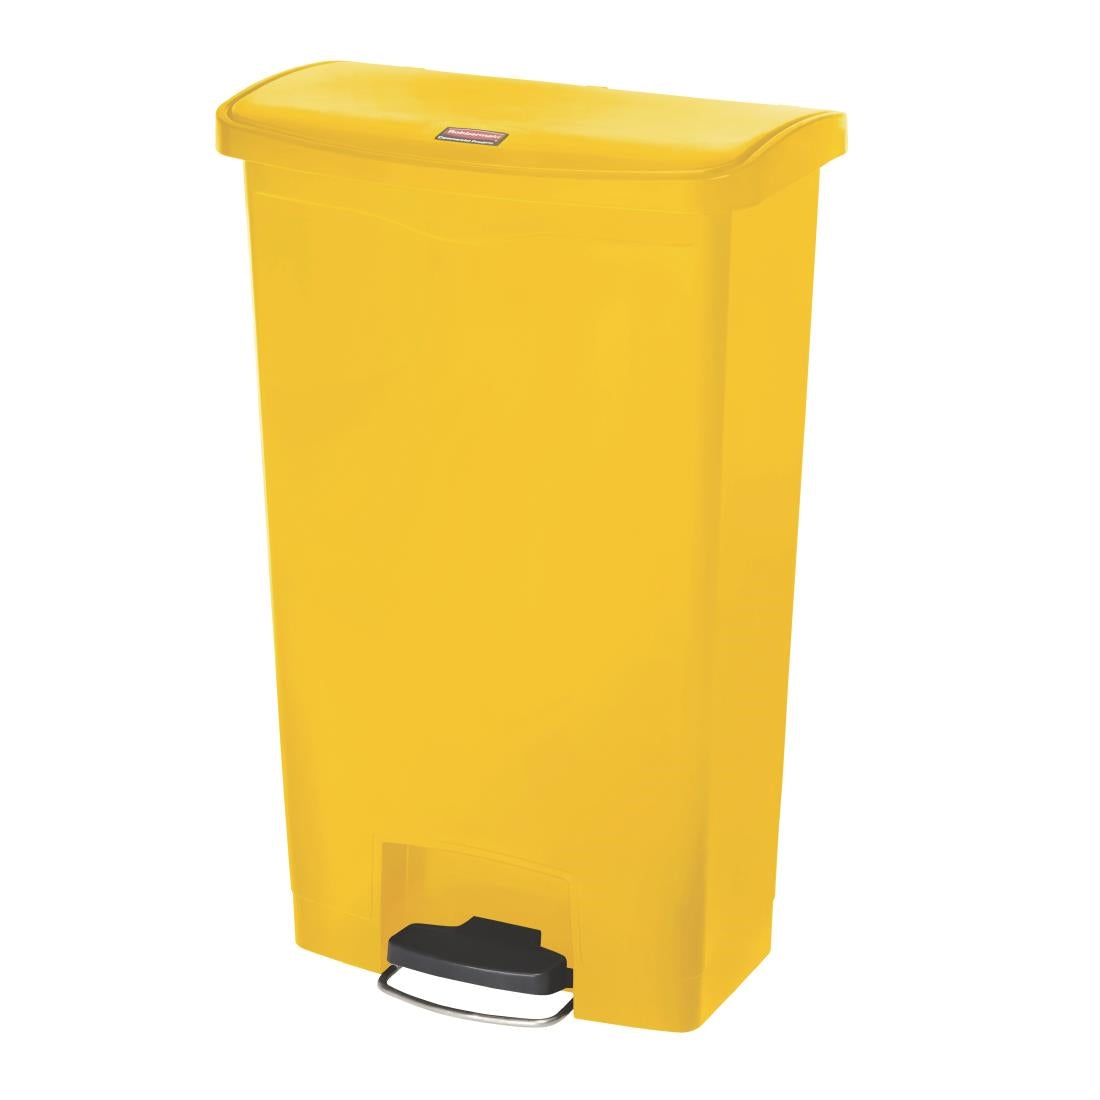 CW589 Rubbermaid Slim Jim Step on Bin Front Pedal 68Ltr Yellow JD Catering Equipment Solutions Ltd